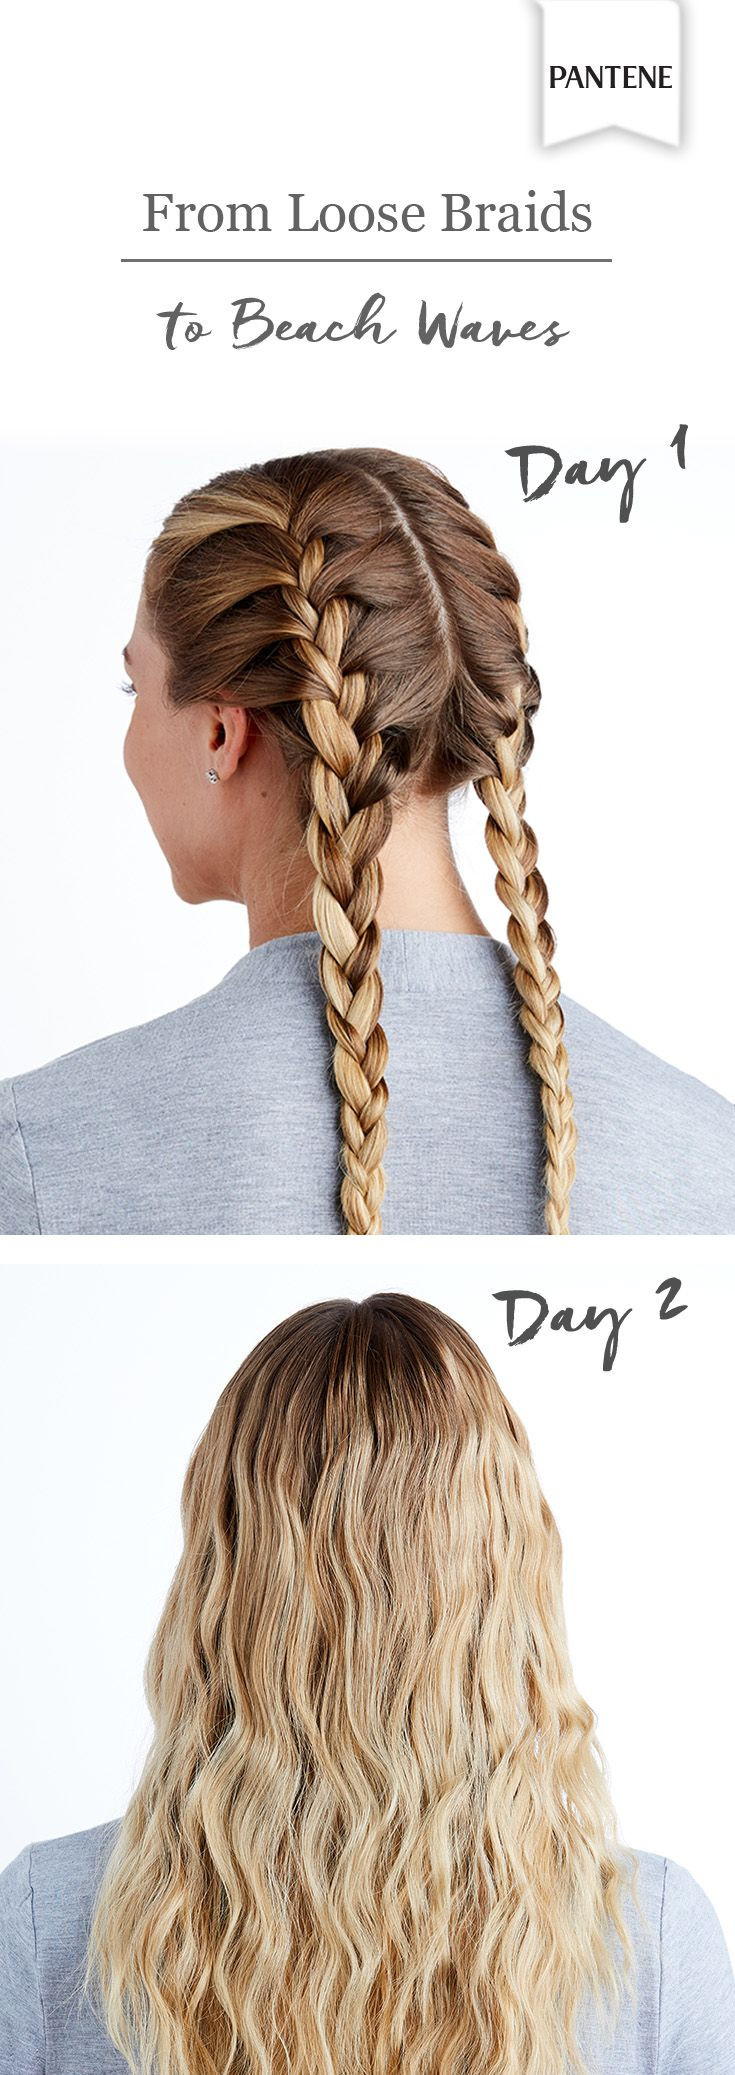 Easy Overnight Hairstyles
 5 Hairstyles for Second day Hair